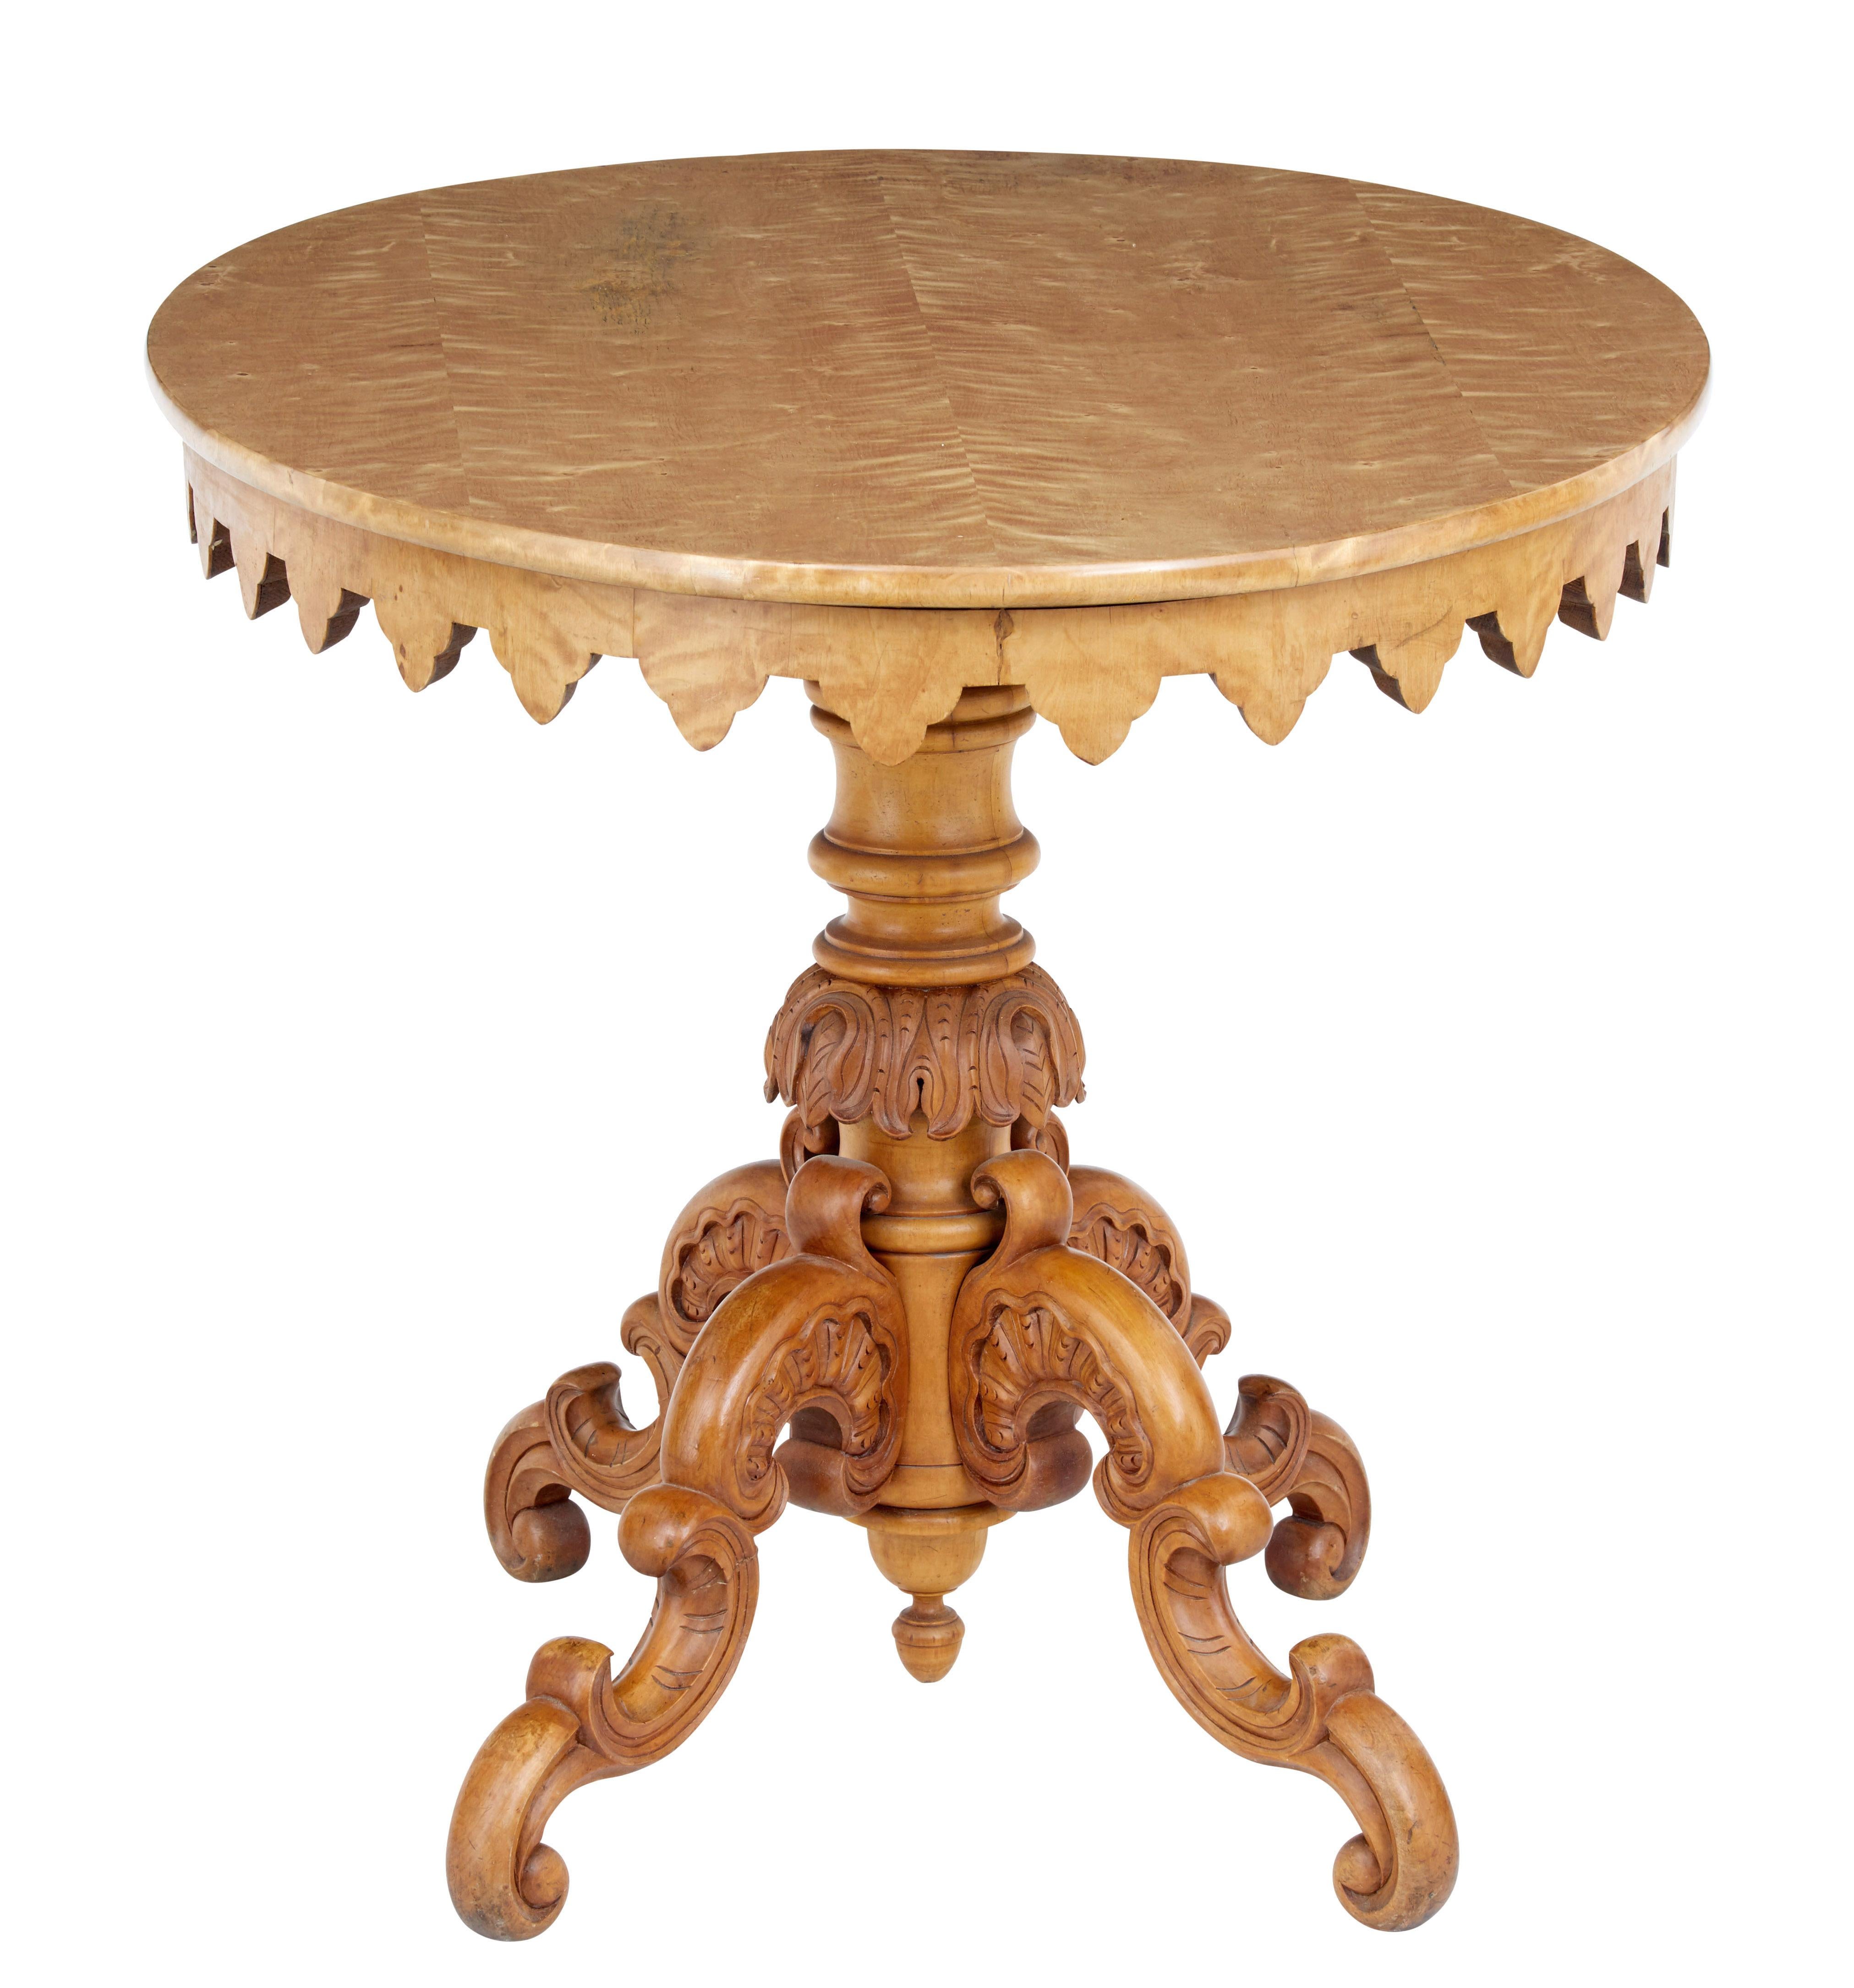 Swedish birch oval center table, circa 1880.

Veneered oval top with shaped Gothic style frieze below the top surface. Standing on a heavily carved and turned base and 4 scrolling legs.

Wear to veneer on top surface which has been polished